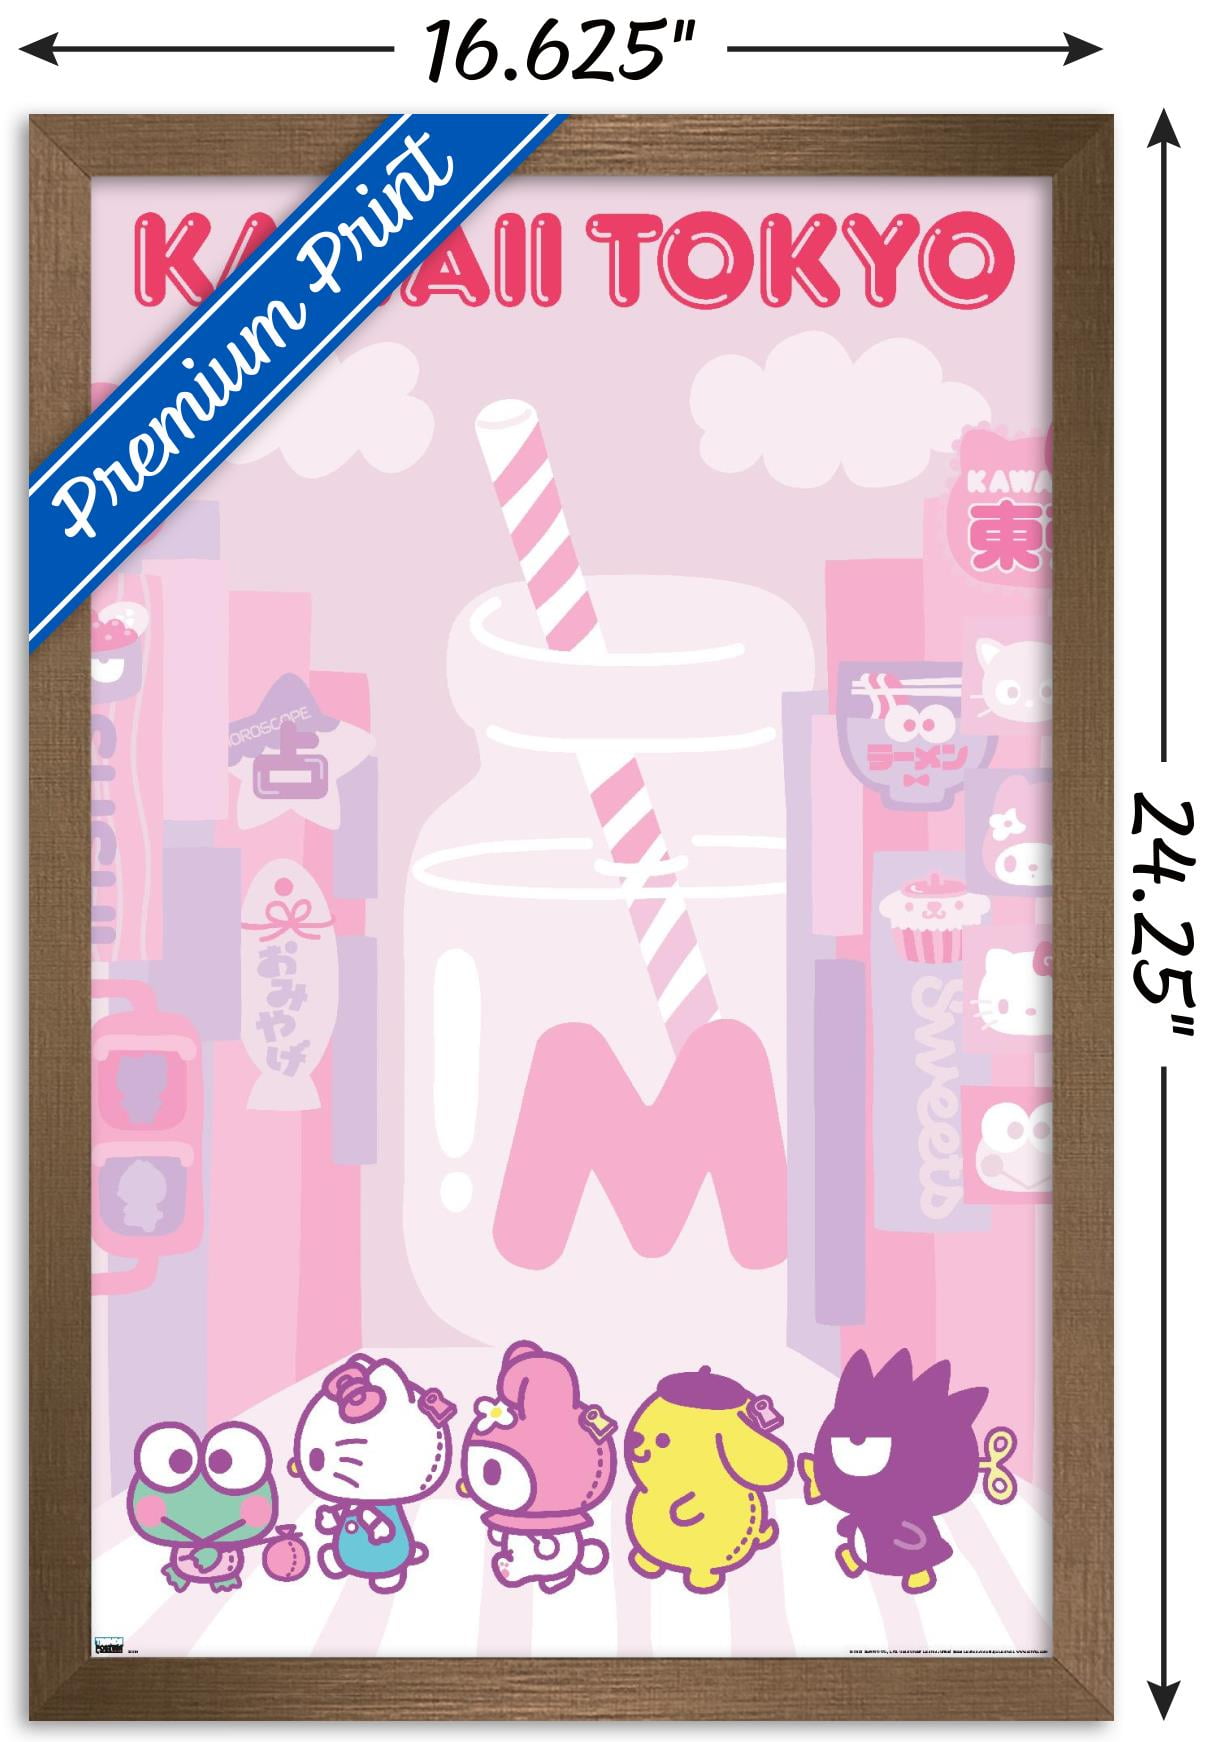 Con Exclusive: Hello Kitty and Friends Kawaii Tokyo 1.5 Premium Pins and Lanyard Set (Limited Edition of 700)